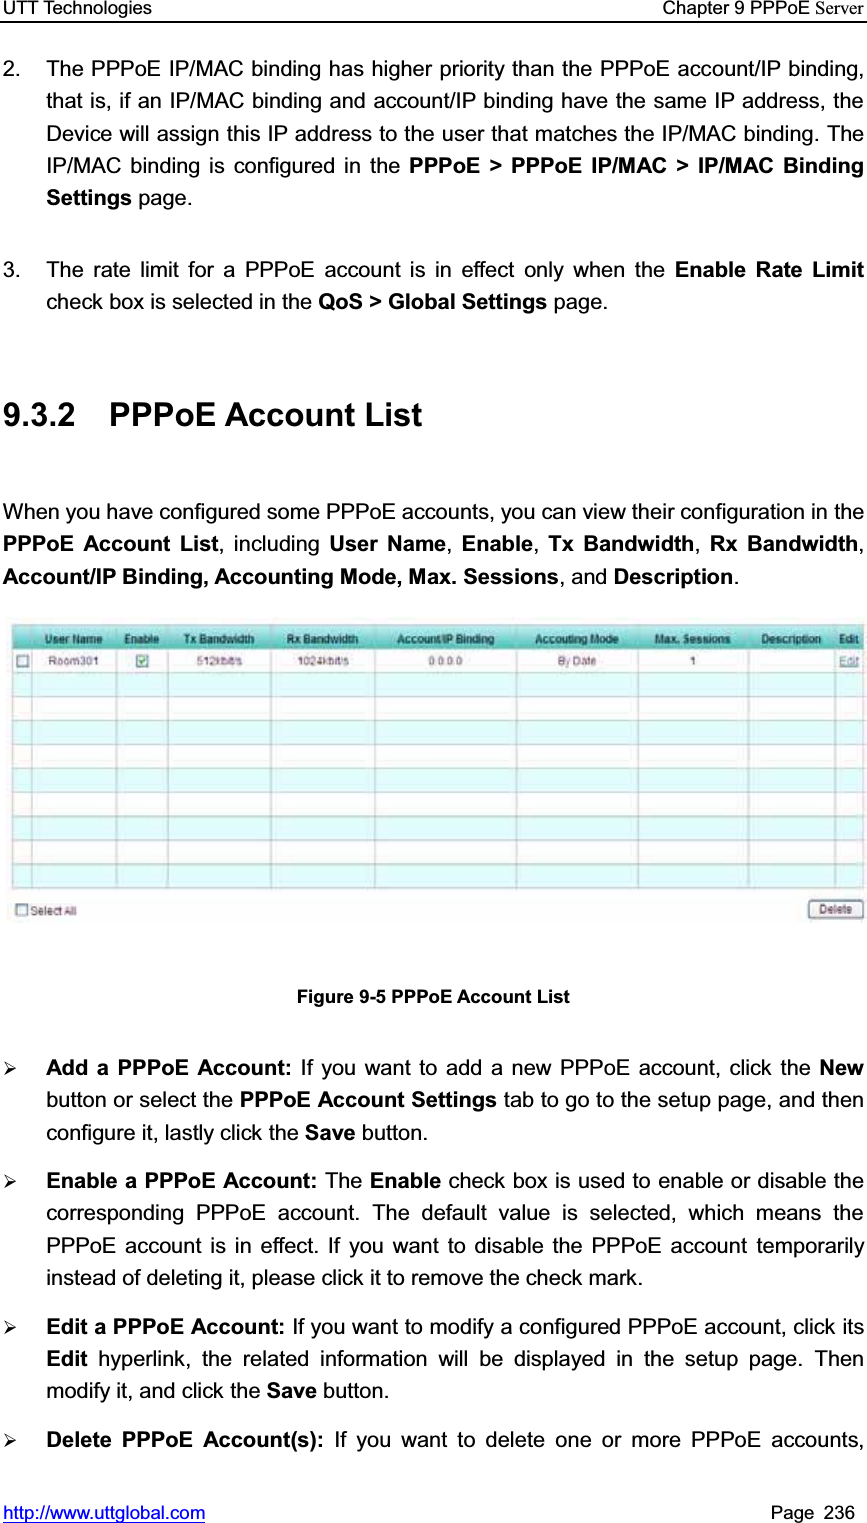 UTT Technologies    Chapter 9 PPPoE Serverhttp://www.uttglobal.com Page 236 2.  The PPPoE IP/MAC binding has higher priority than the PPPoE account/IP binding, that is, if an IP/MAC binding and account/IP binding have the same IP address, the Device will assign this IP address to the user that matches the IP/MAC binding. The IP/MAC binding is configured in the PPPoE &gt; PPPoE IP/MAC &gt; IP/MAC Binding Settings page. 3.  The rate limit for a PPPoE account is in effect only when the Enable Rate Limit check box is selected in the QoS &gt; Global Settings page. 9.3.2 PPPoE Account List When you have configured some PPPoE accounts, you can view their configuration in thePPPoE Account List, including User Name,Enable,Tx Bandwidth,Rx Bandwidth,Account/IP Binding, Accounting Mode, Max. Sessions, and Description.Figure 9-5 PPPoE Account List ¾Add a PPPoE Account: If you want to add a new PPPoE account, click the New button or select the PPPoE Account Settings tab to go to the setup page, and then configure it, lastly click the Save button. ¾Enable a PPPoE Account: The Enable check box is used to enable or disable the corresponding PPPoE account. The default value is selected, which means the PPPoE account is in effect. If you want to disable the PPPoE account temporarily instead of deleting it, please click it to remove the check mark.   ¾Edit a PPPoE Account: If you want to modify a configured PPPoE account, click itsEdit hyperlink, the related information will be displayed in the setup page. Then modify it, and click the Save button.  ¾Delete PPPoE Account(s): If you want to delete one or more PPPoE accounts, 